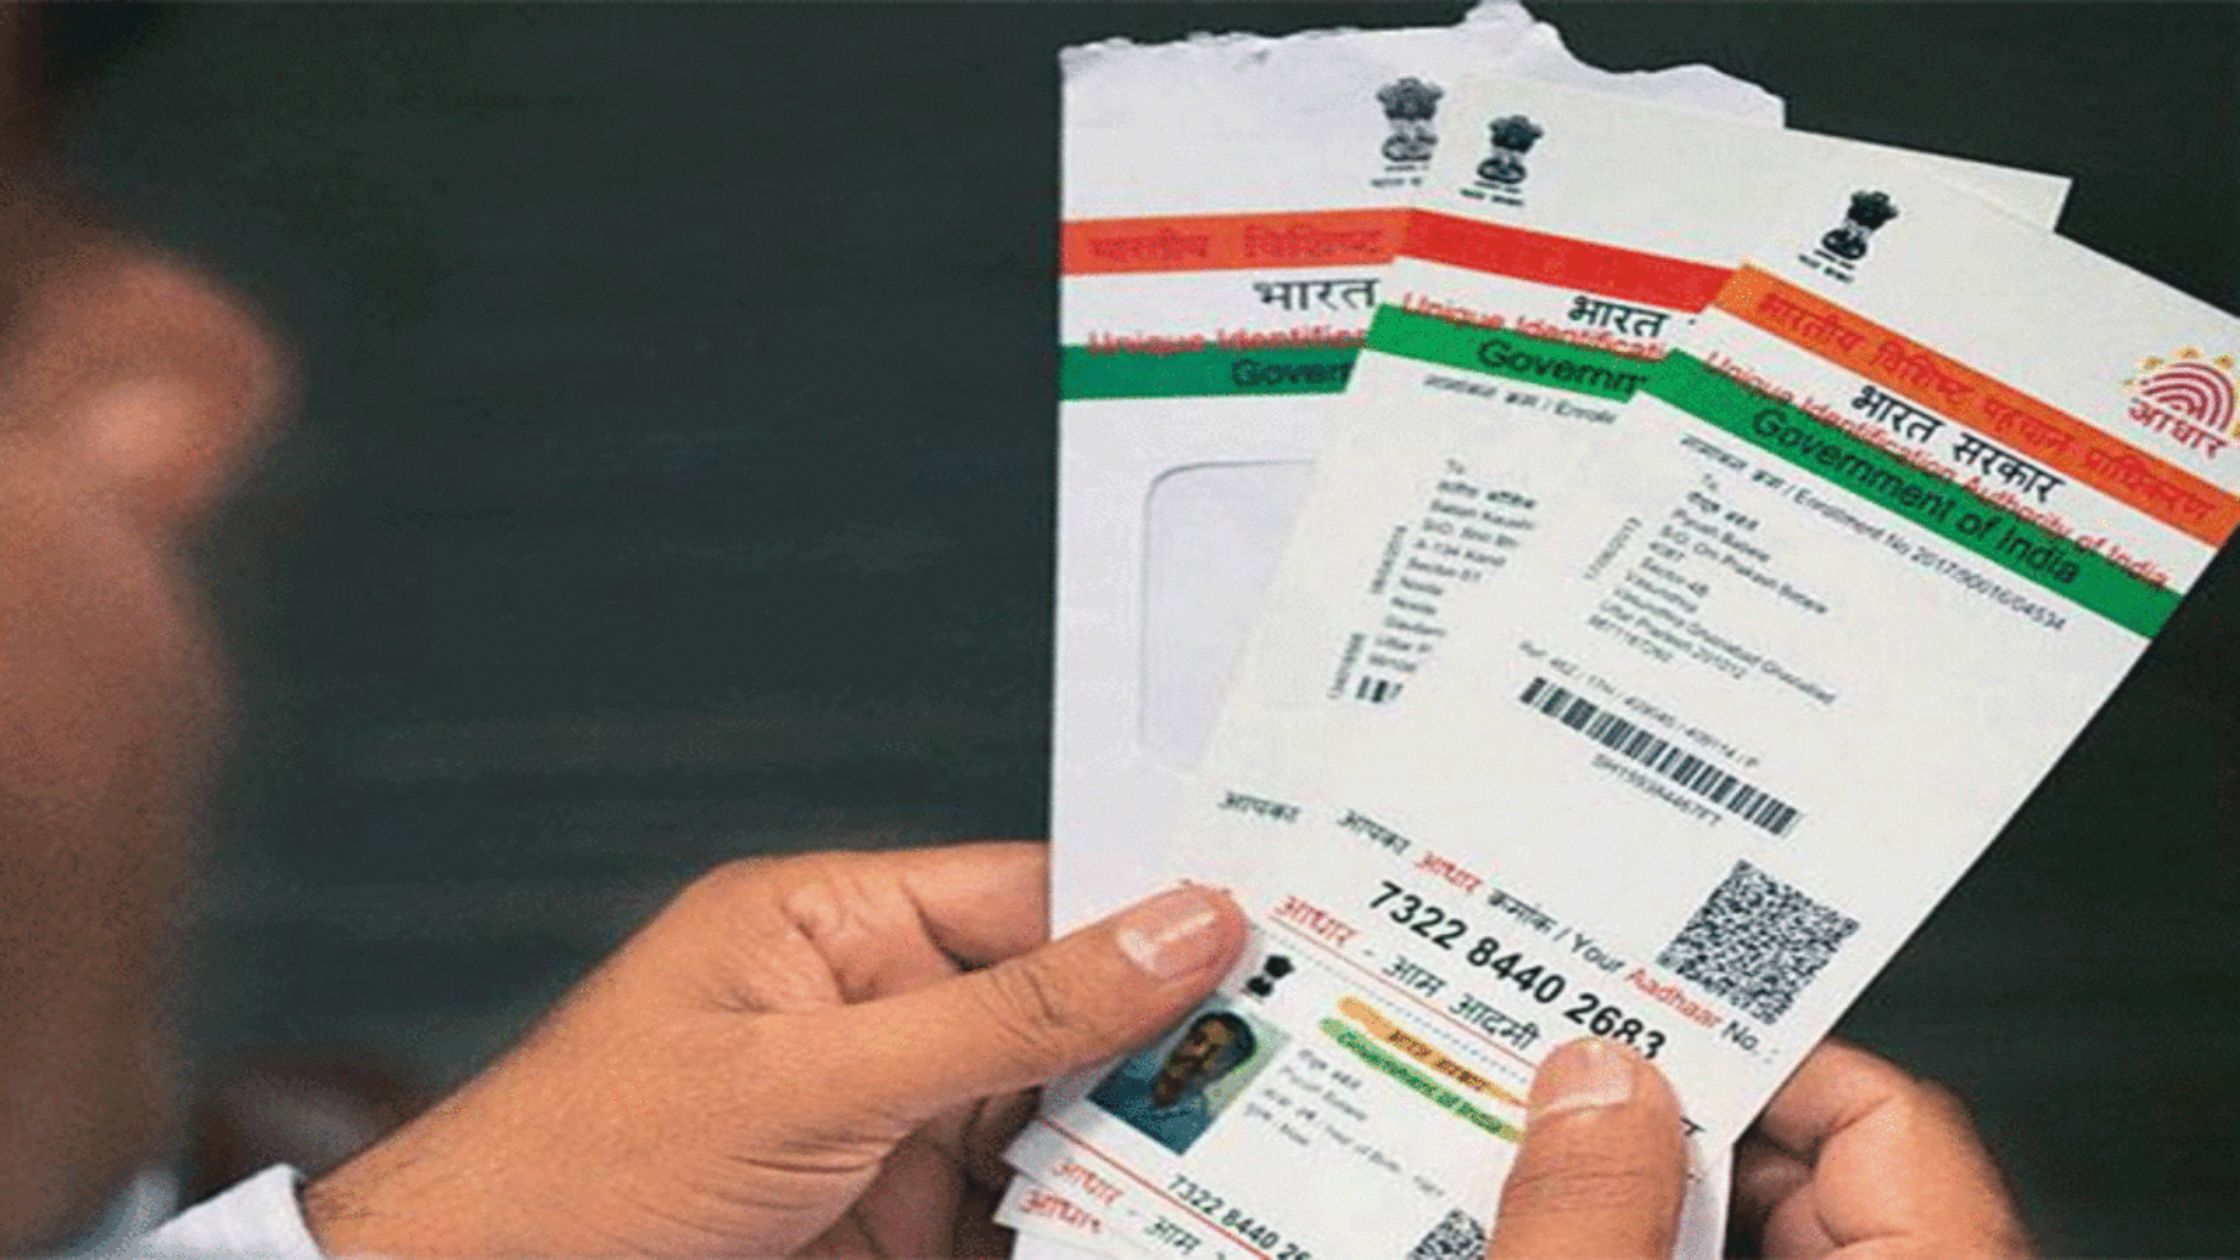 Aadhaar related documents will have to be updated every 10 years